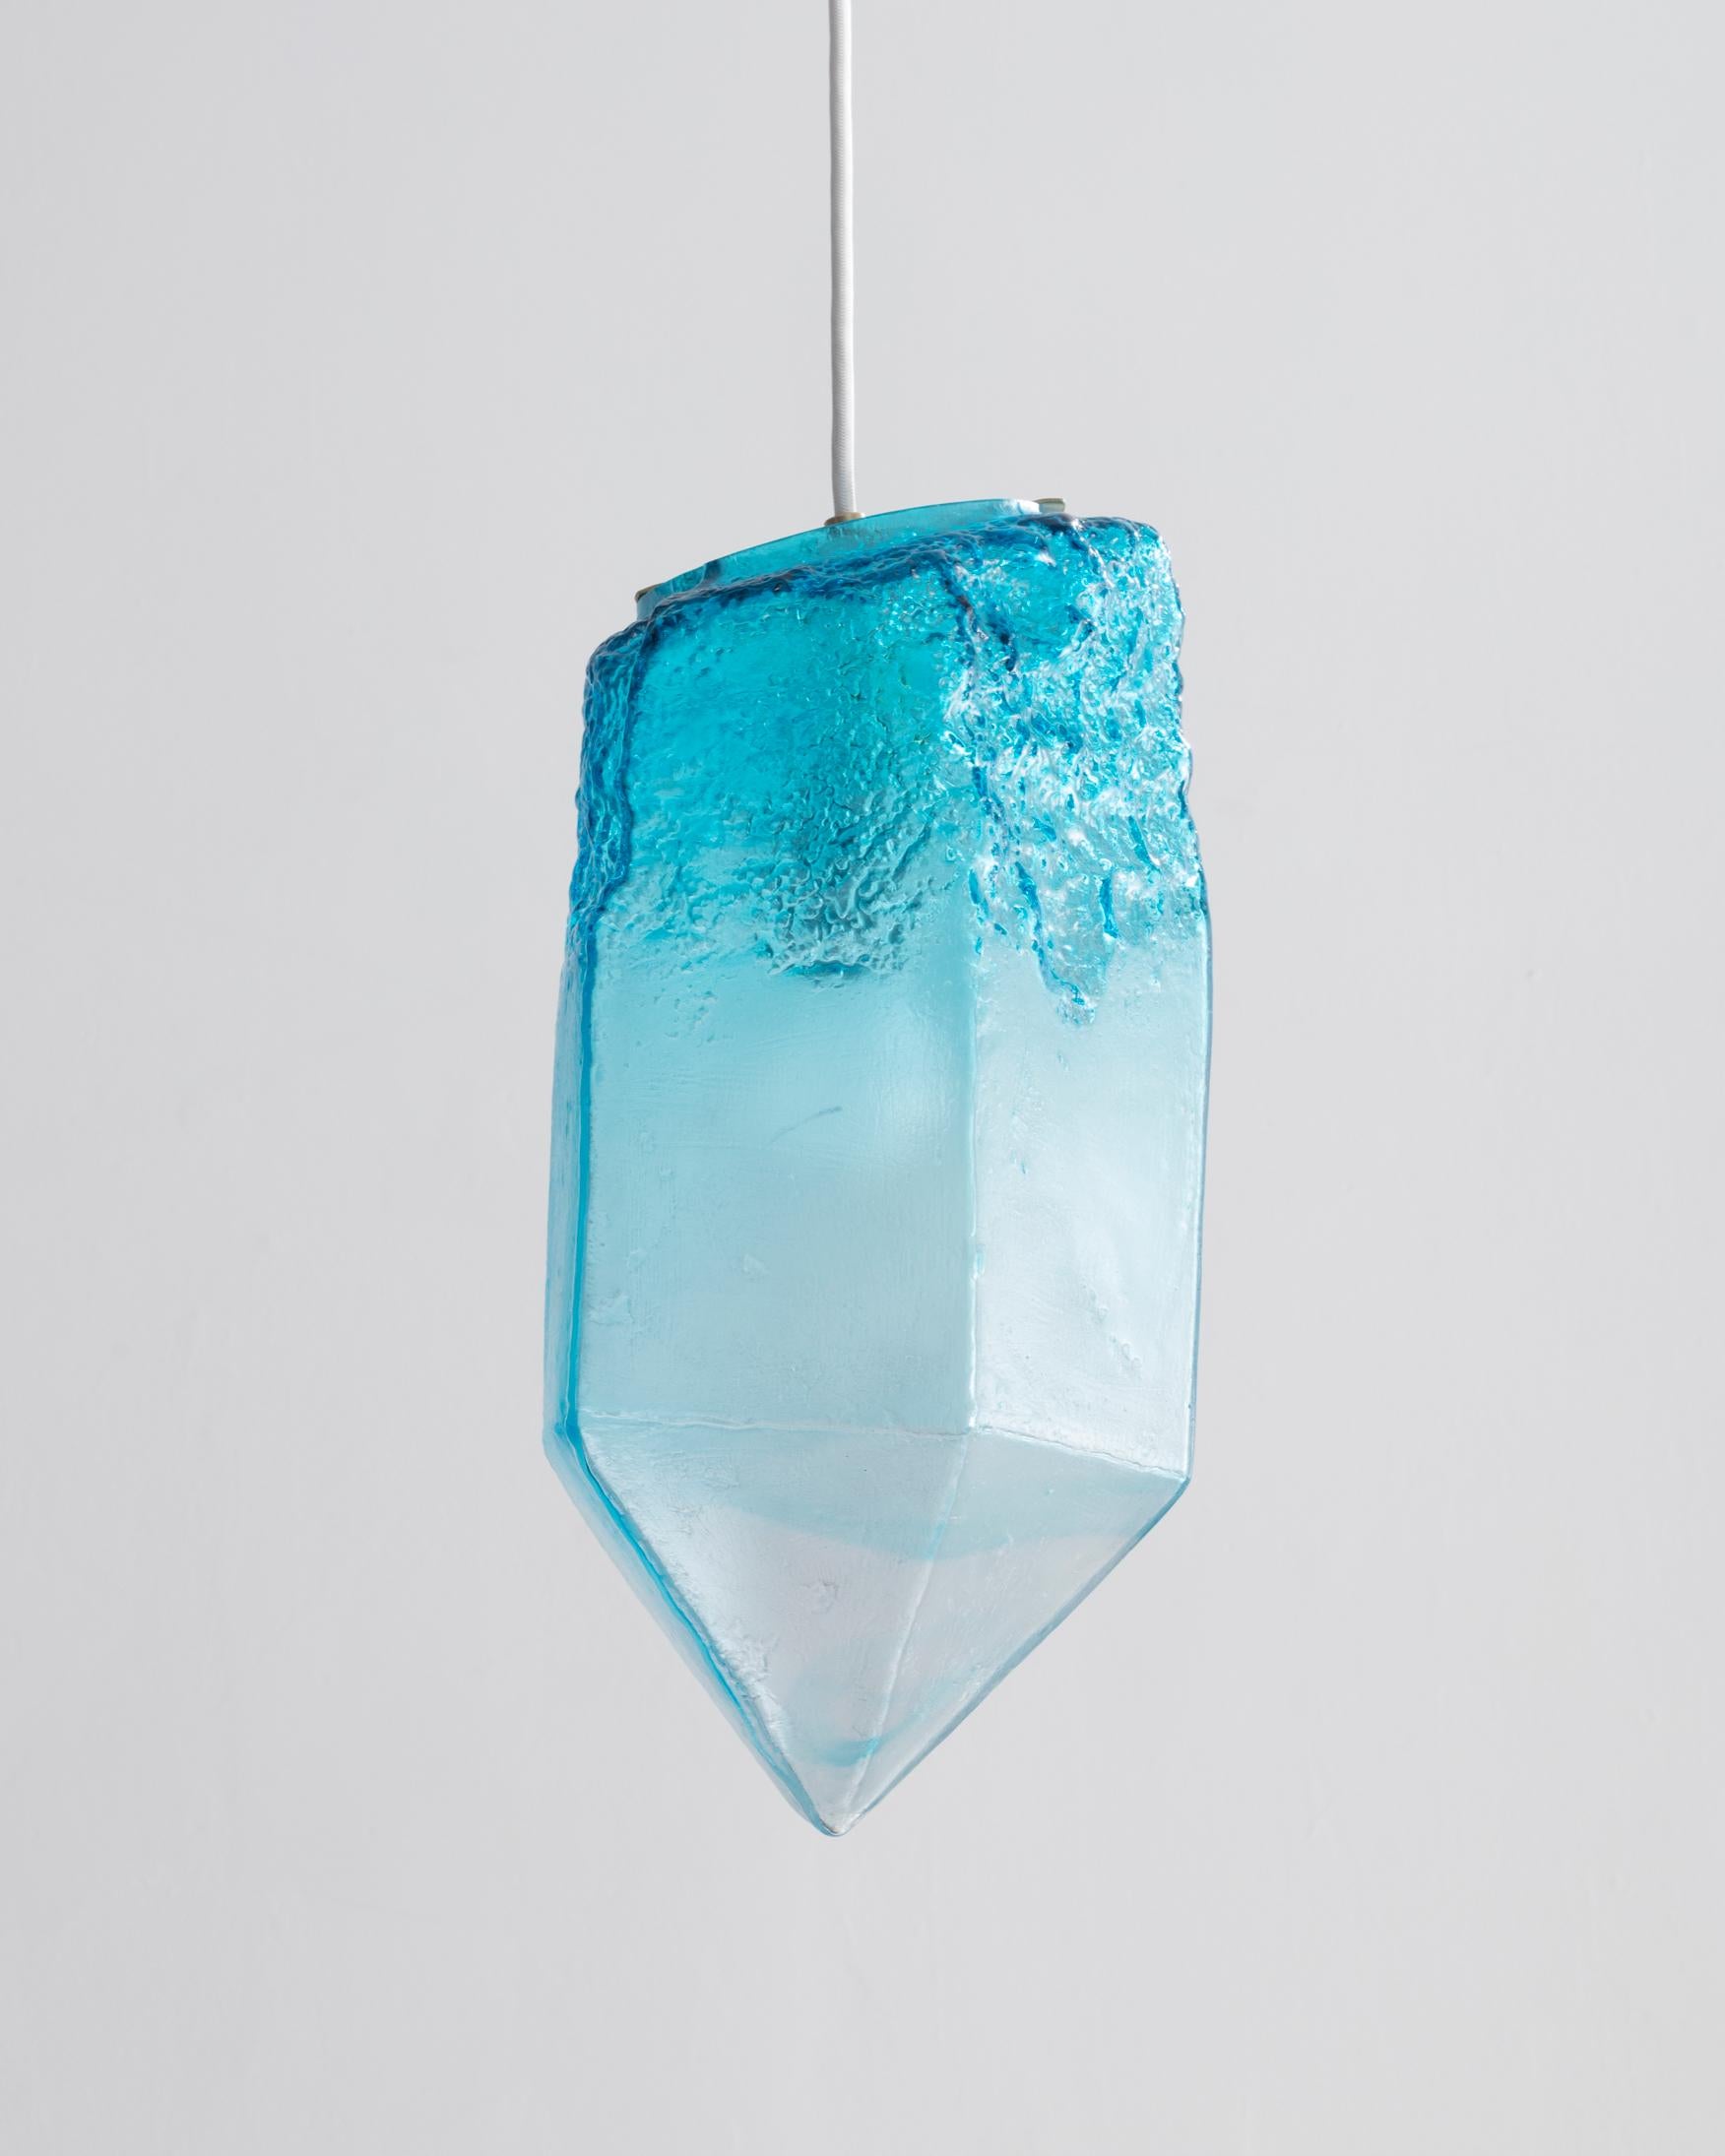 Crystal illuminated sculptural pendant in hand blown turquoise glass. Designed and made by Jeff Zimmerman, USA, 2016.
      